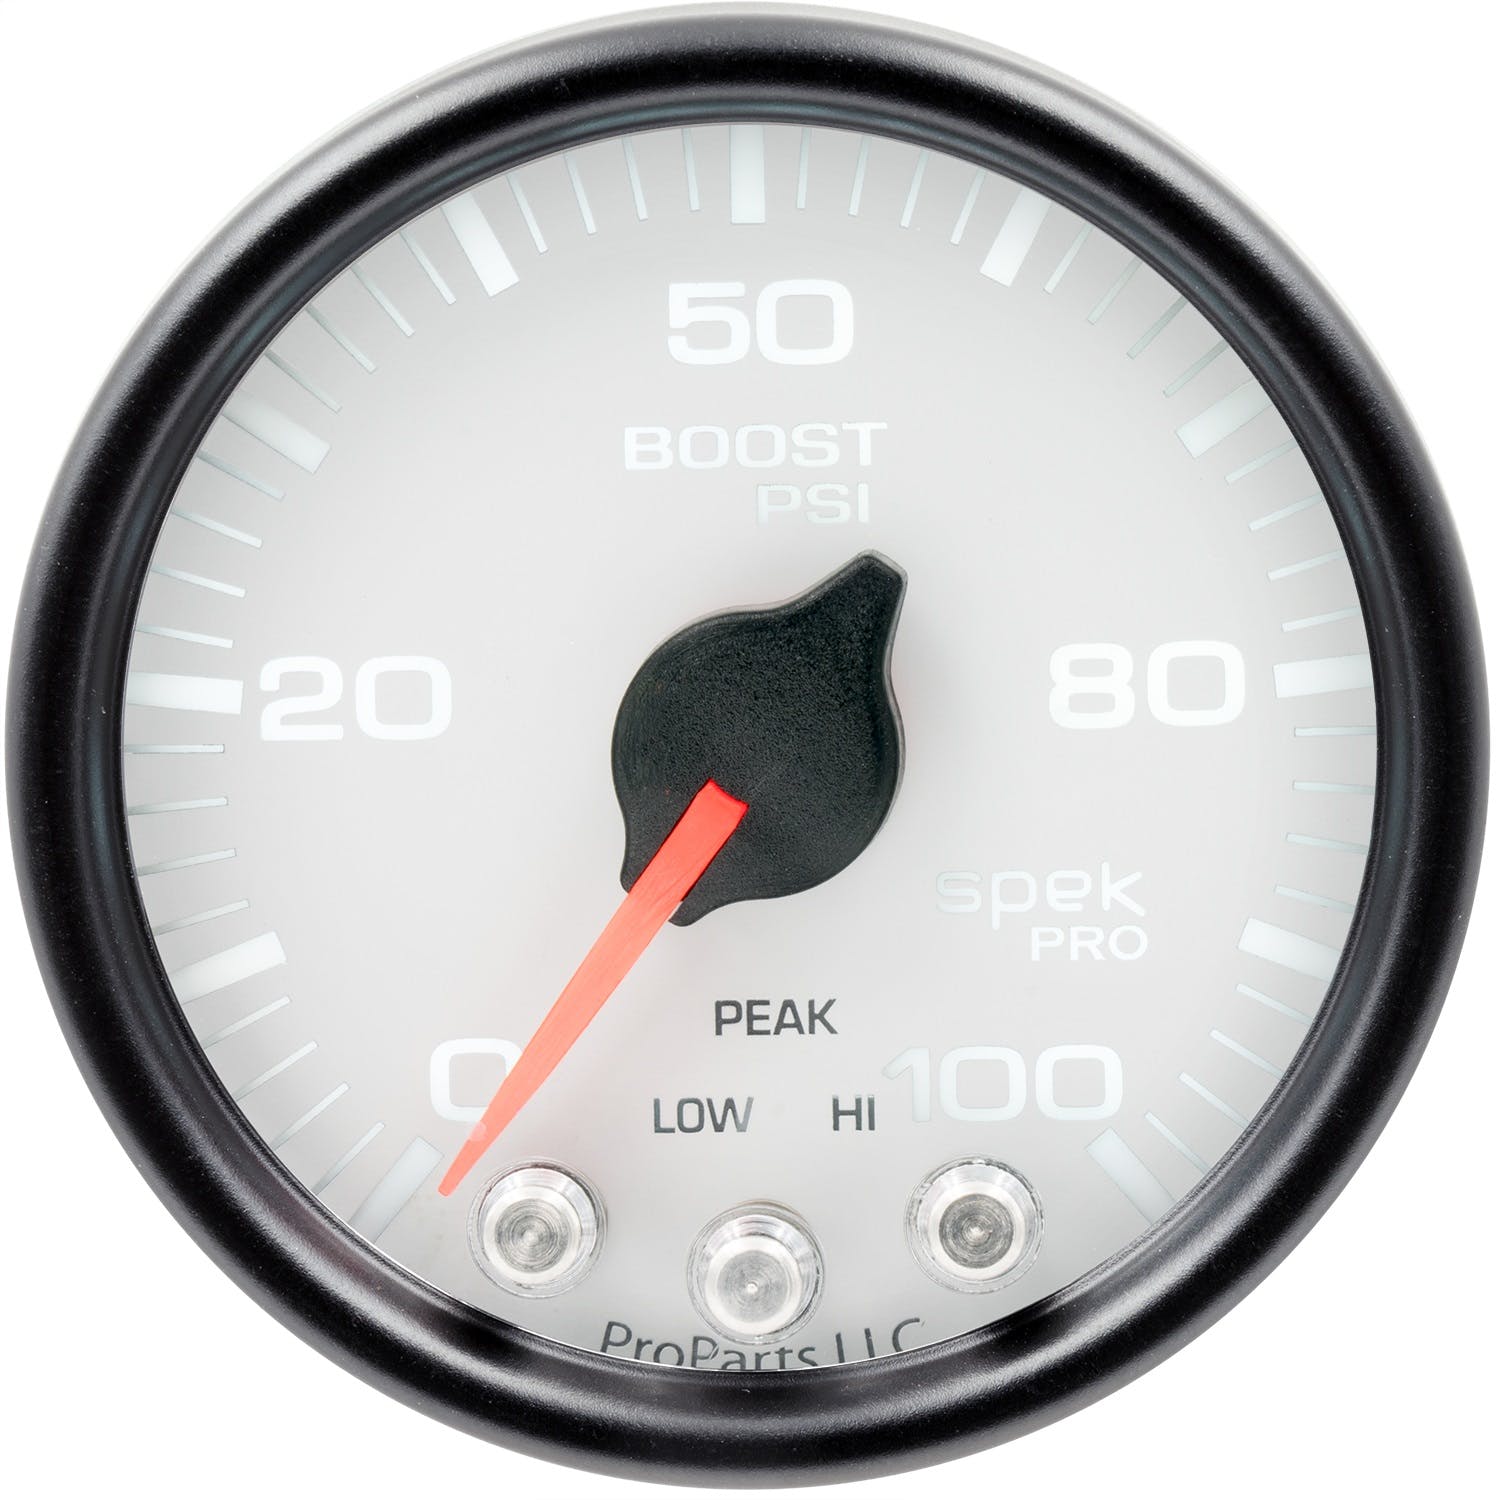 AutoMeter Products P30512 Boost Gauge, 2 1/16, 100PSI, Stepper Motor White/Black